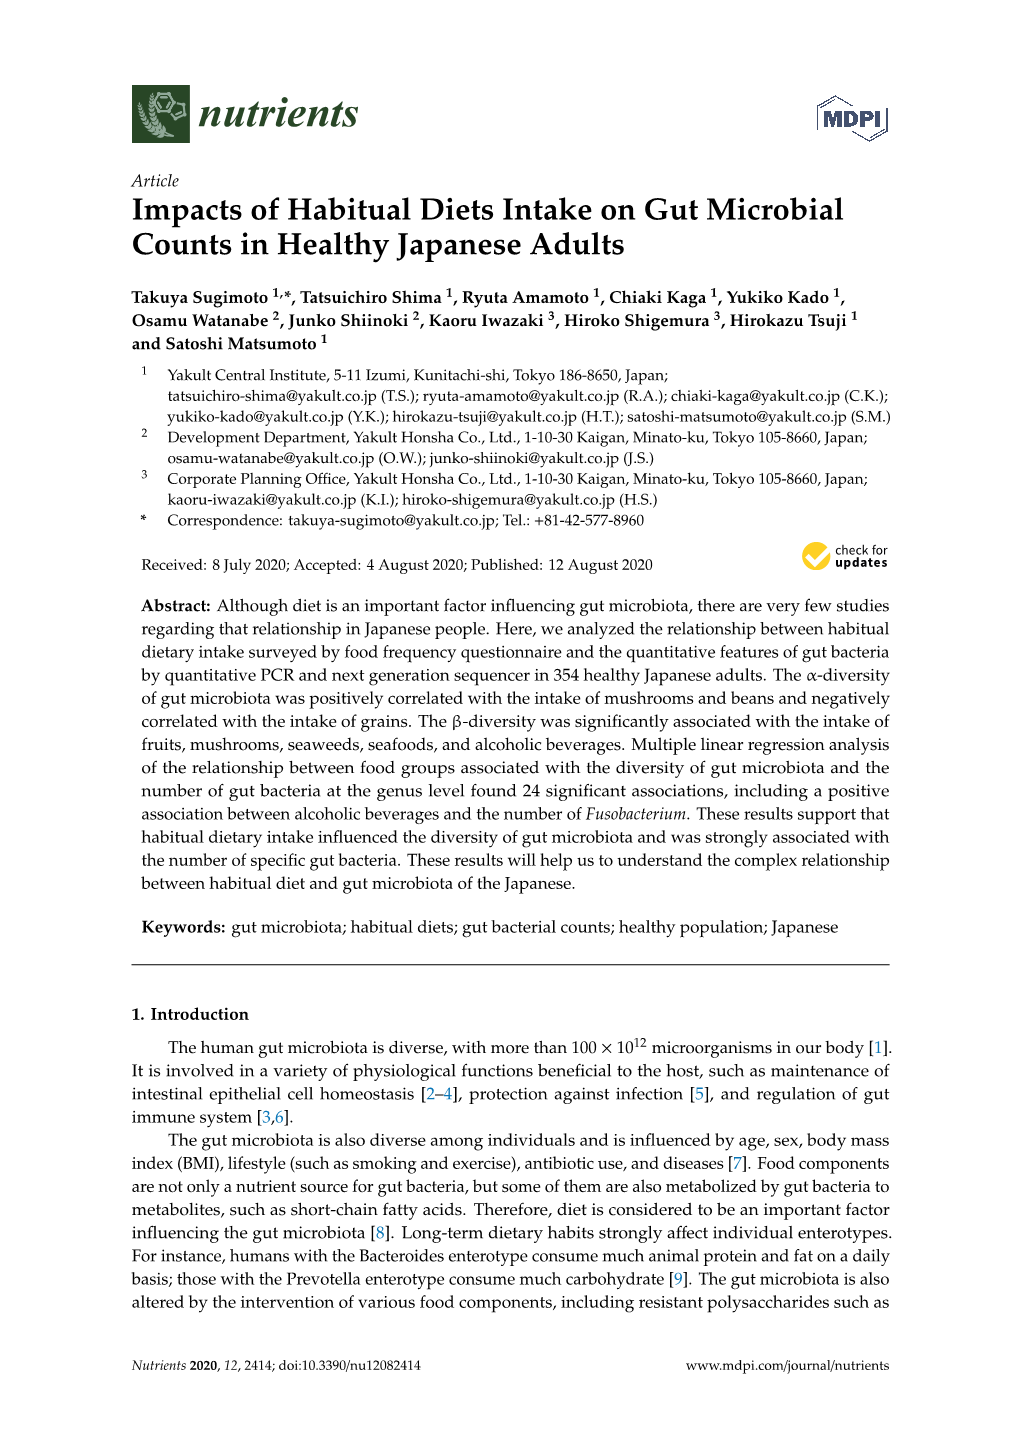 Impacts of Habitual Diets Intake on Gut Microbial Counts in Healthy Japanese Adults